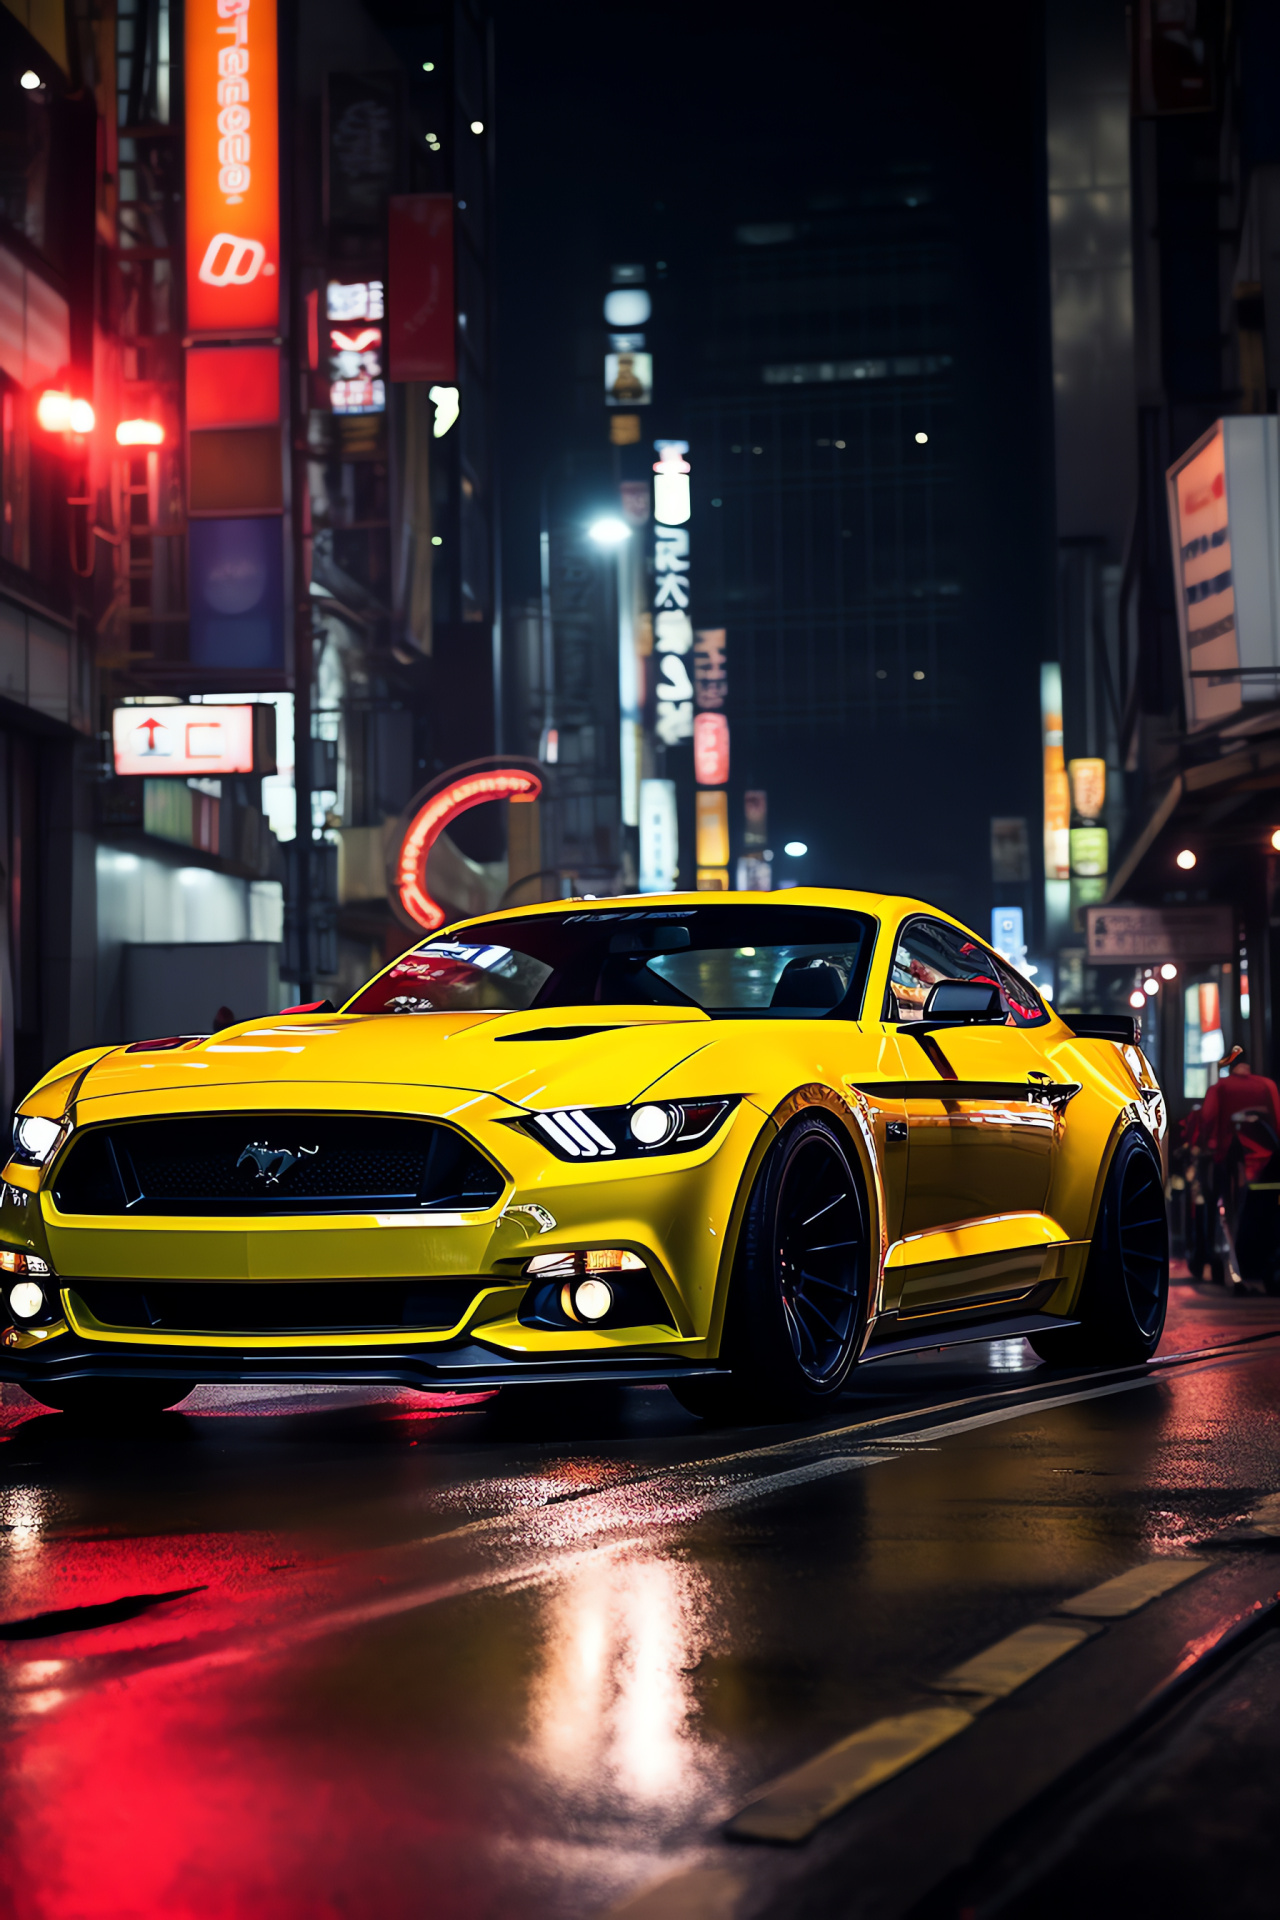 Ford Mustang Tokyo drift, Action packed Mustang, GT performance, Urban street race, Neon sign reflections, HD Phone Image